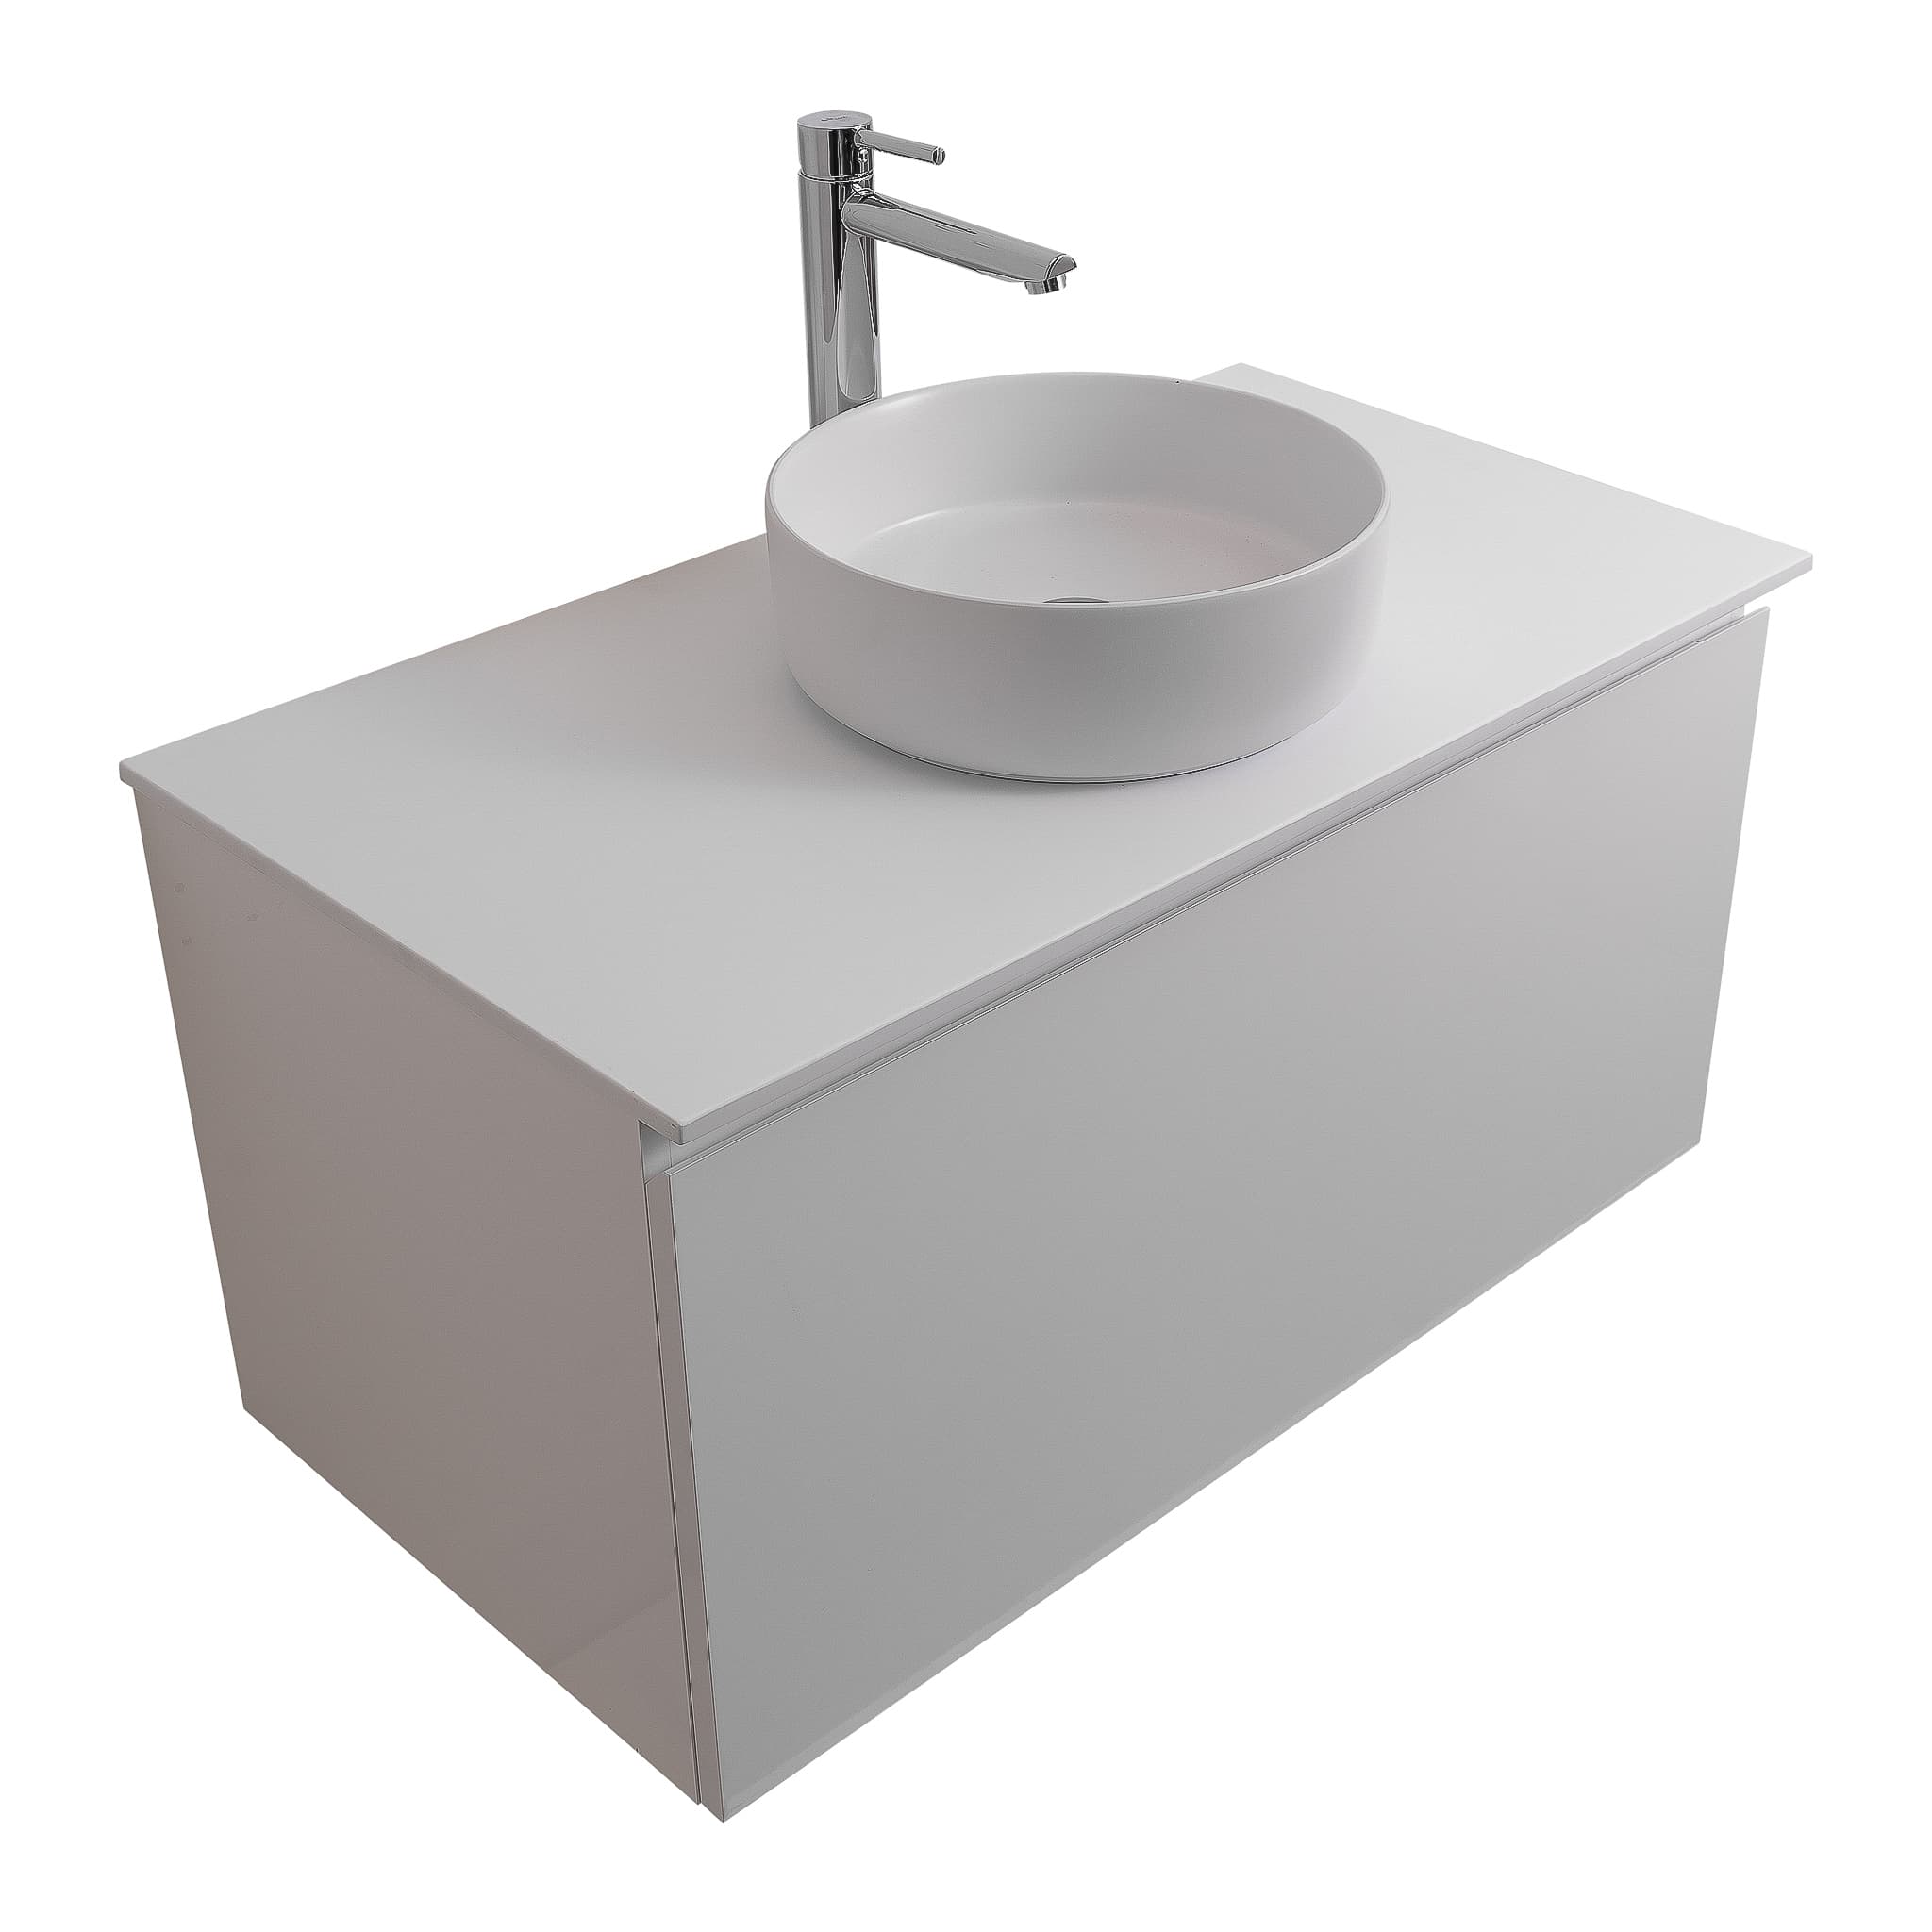 Venice 39.5 White High Gloss Cabinet, Ares White Top And Ares White Ceramic Basin, Wall Mounted Modern Vanity Set